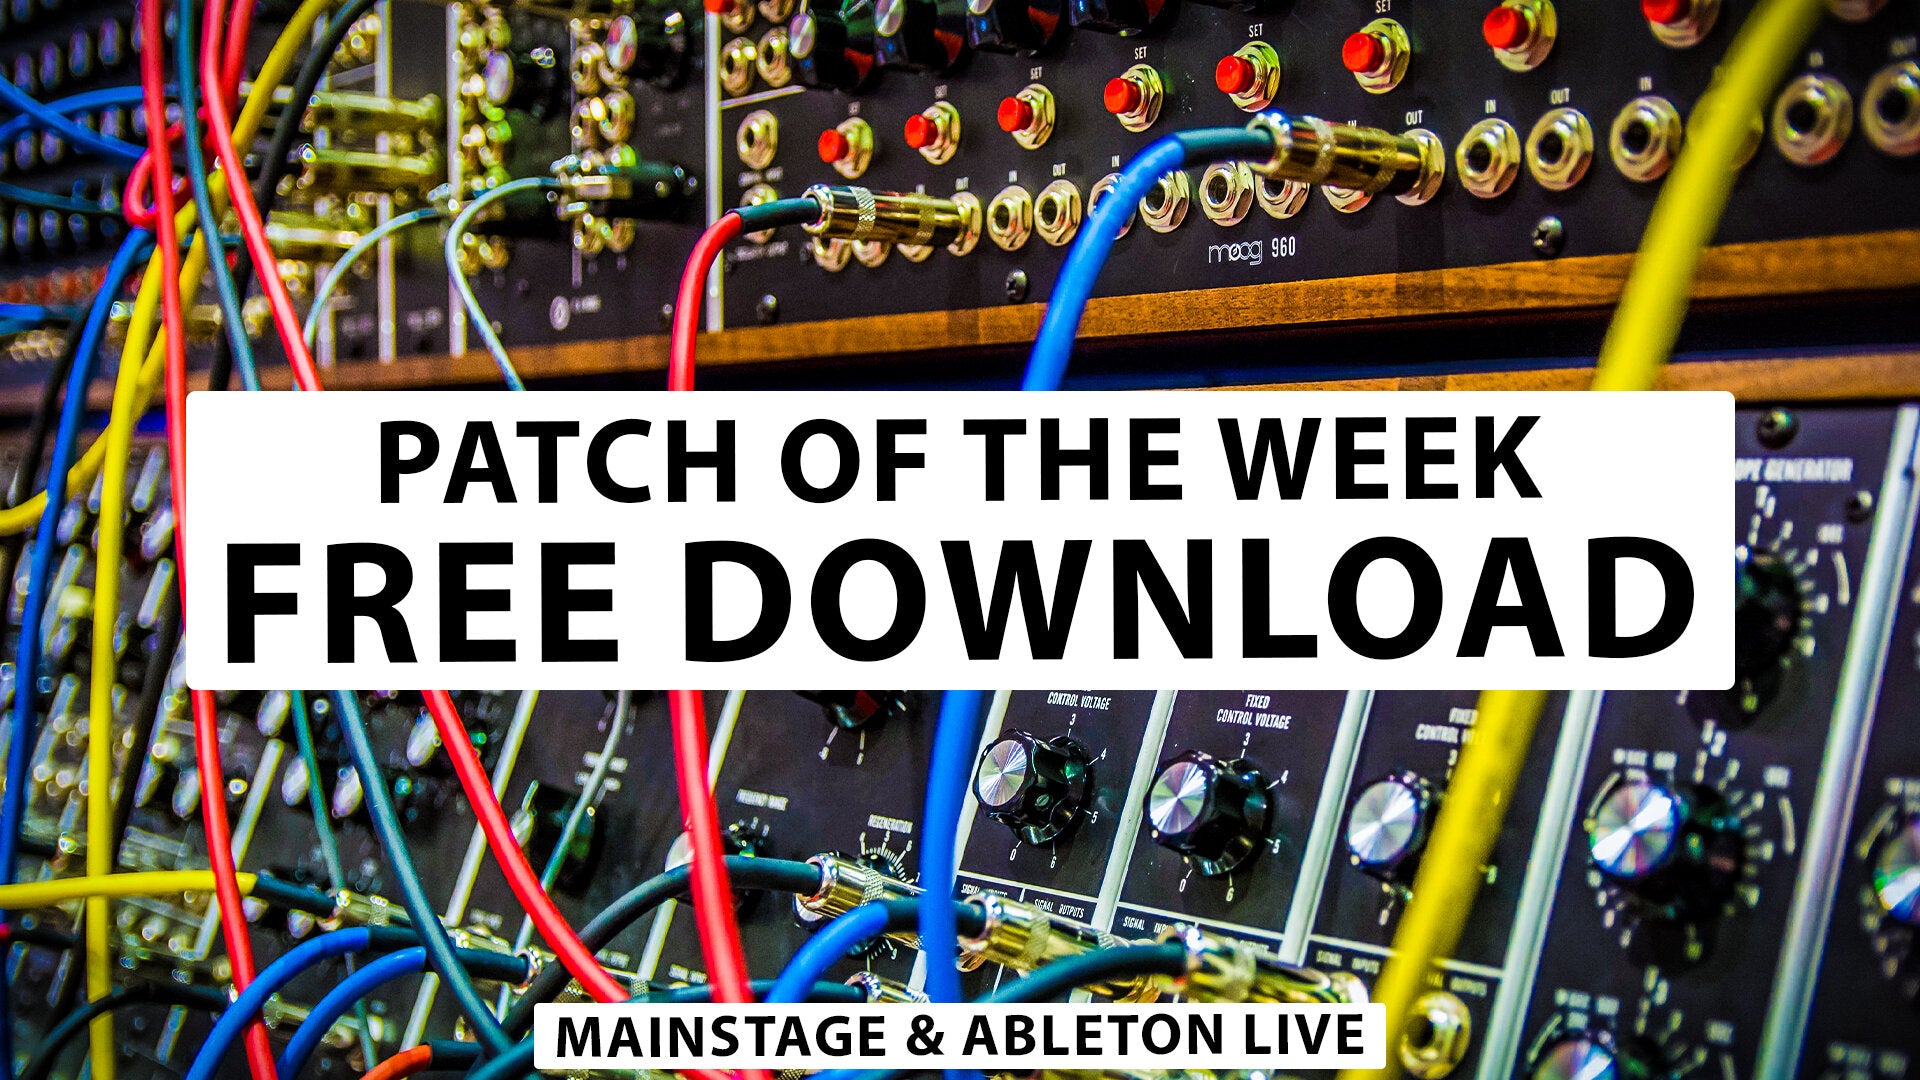 Delivered Lead - Free MainStage & Ableton Worship Patch!